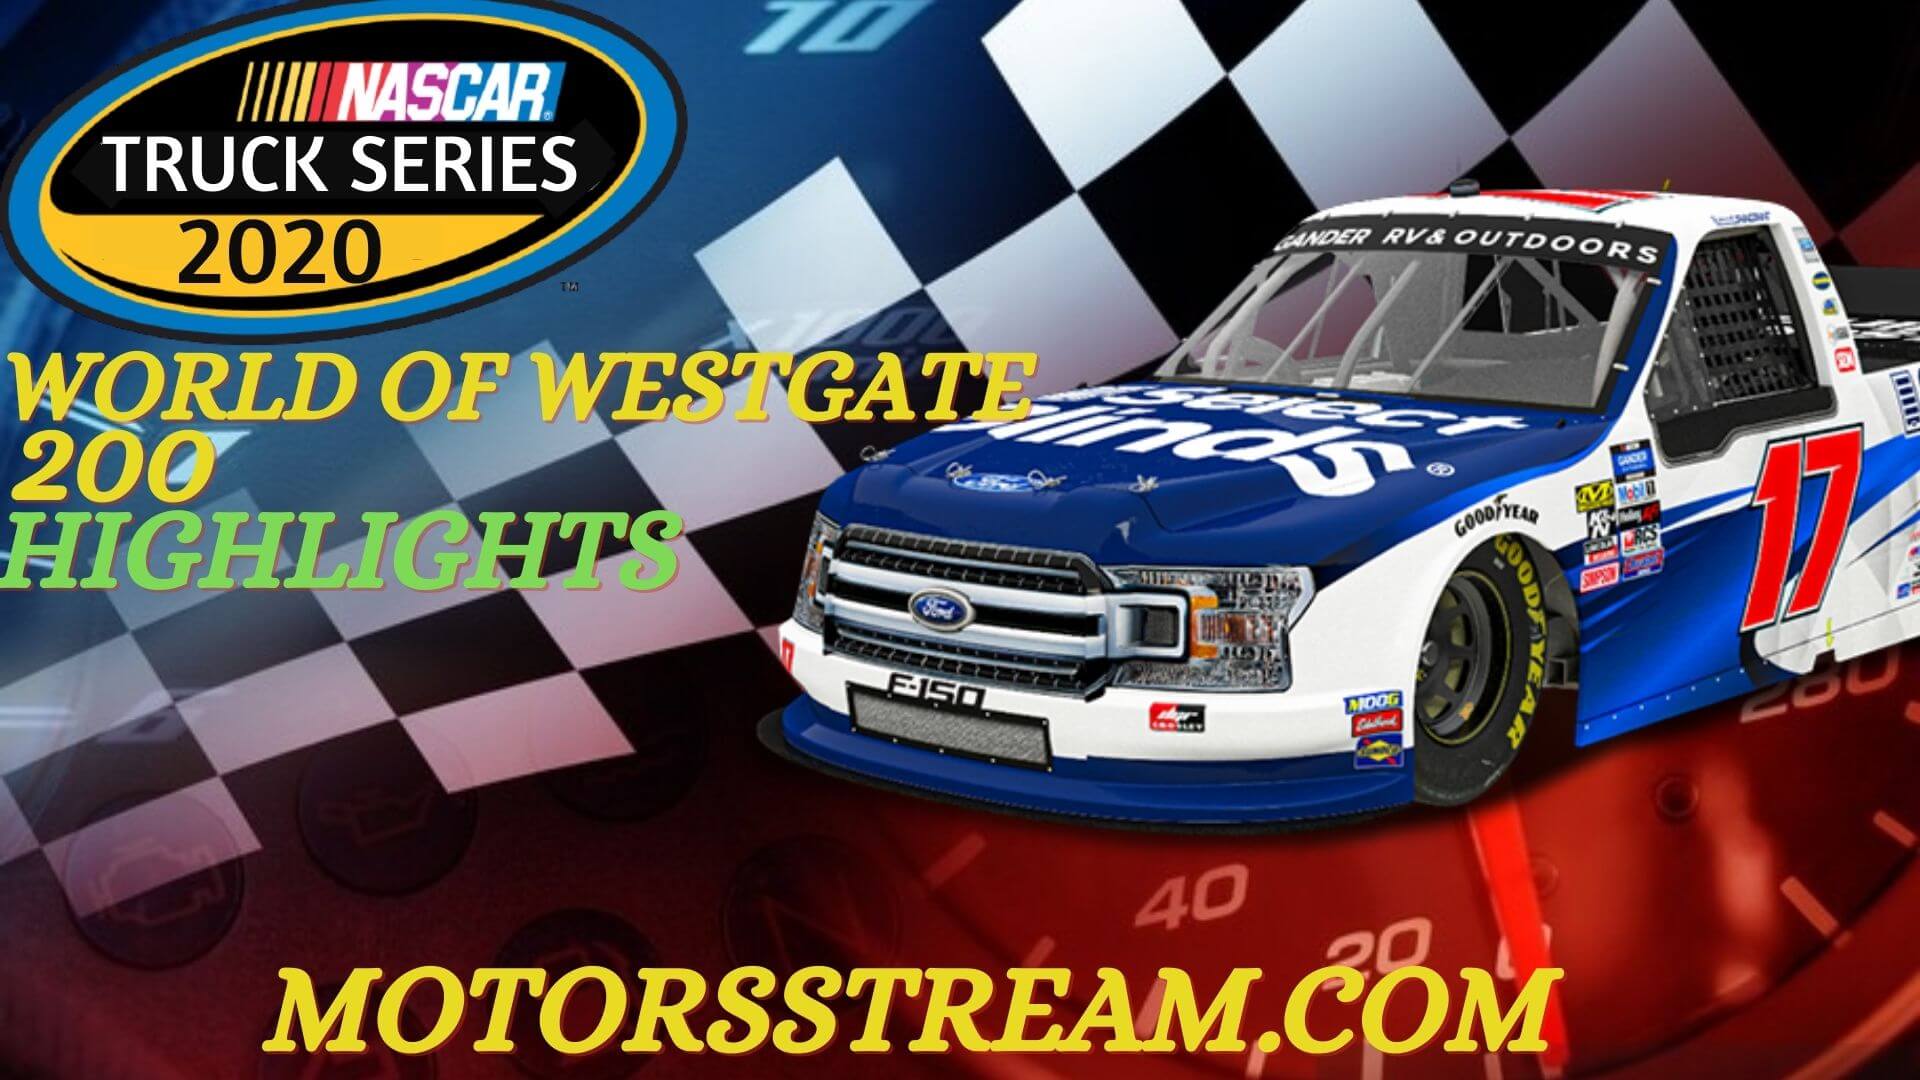 World of Westgate 200 Highlights 2020 Truck Series